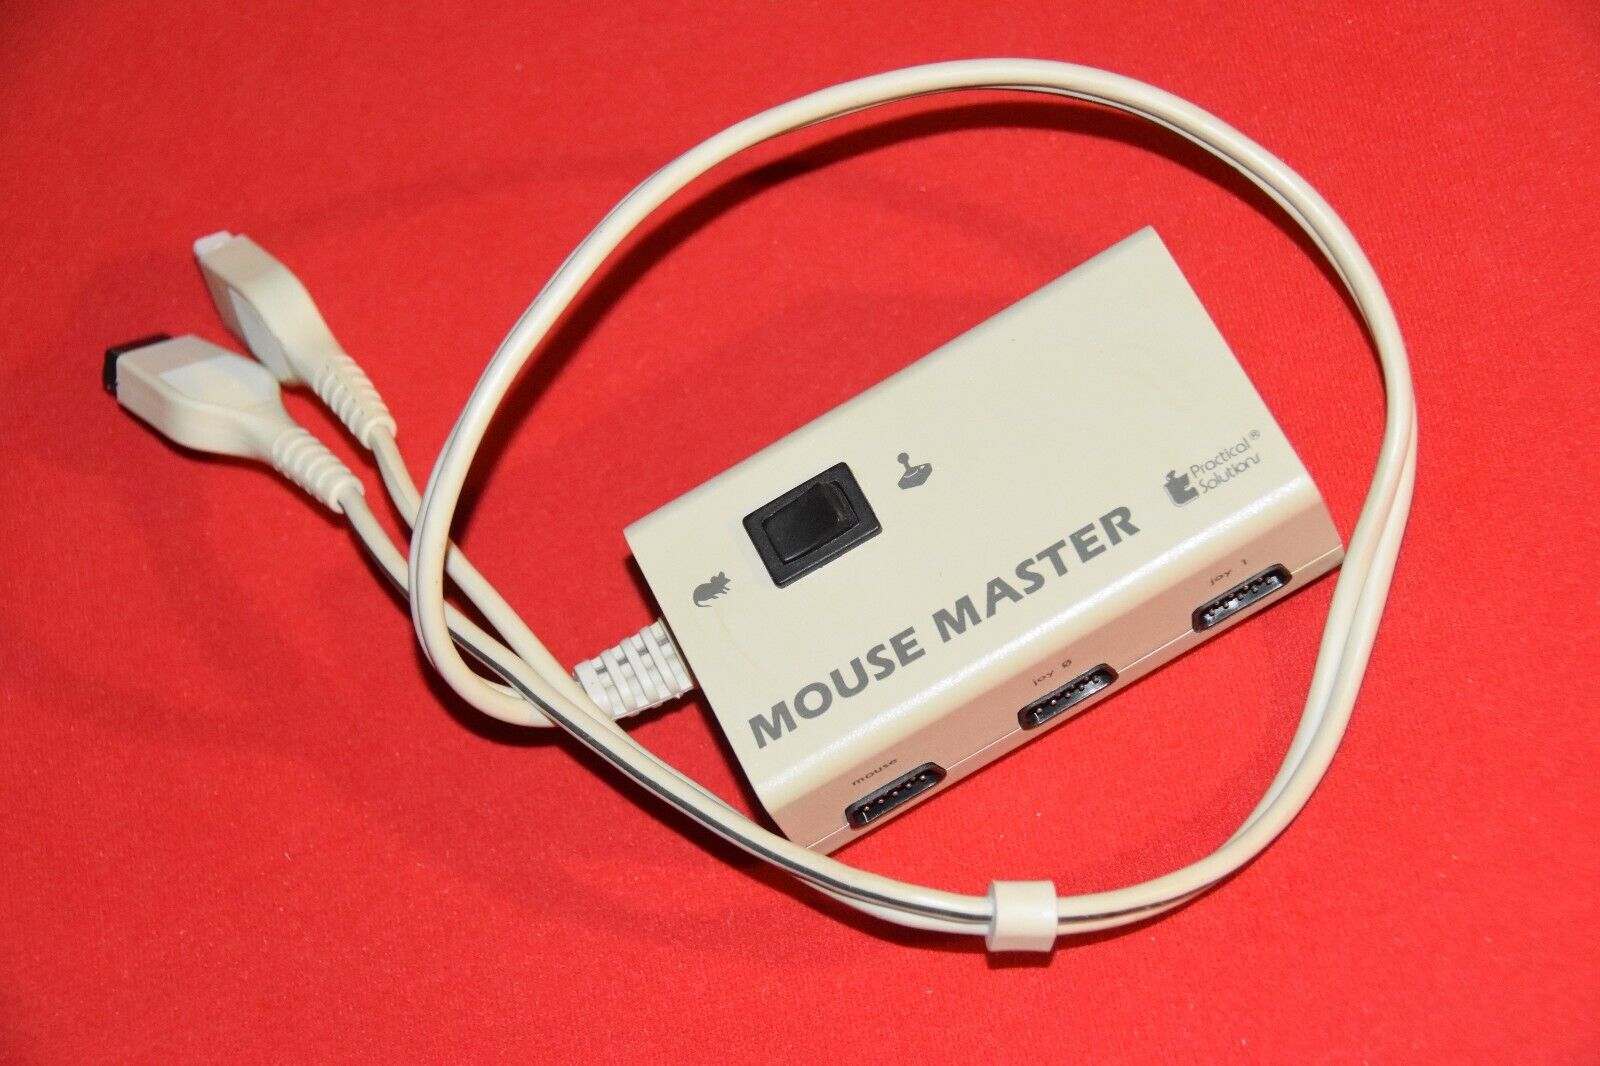 Vintage Mouse Master Computer Practical Solution Adapter Switcher Commodore +